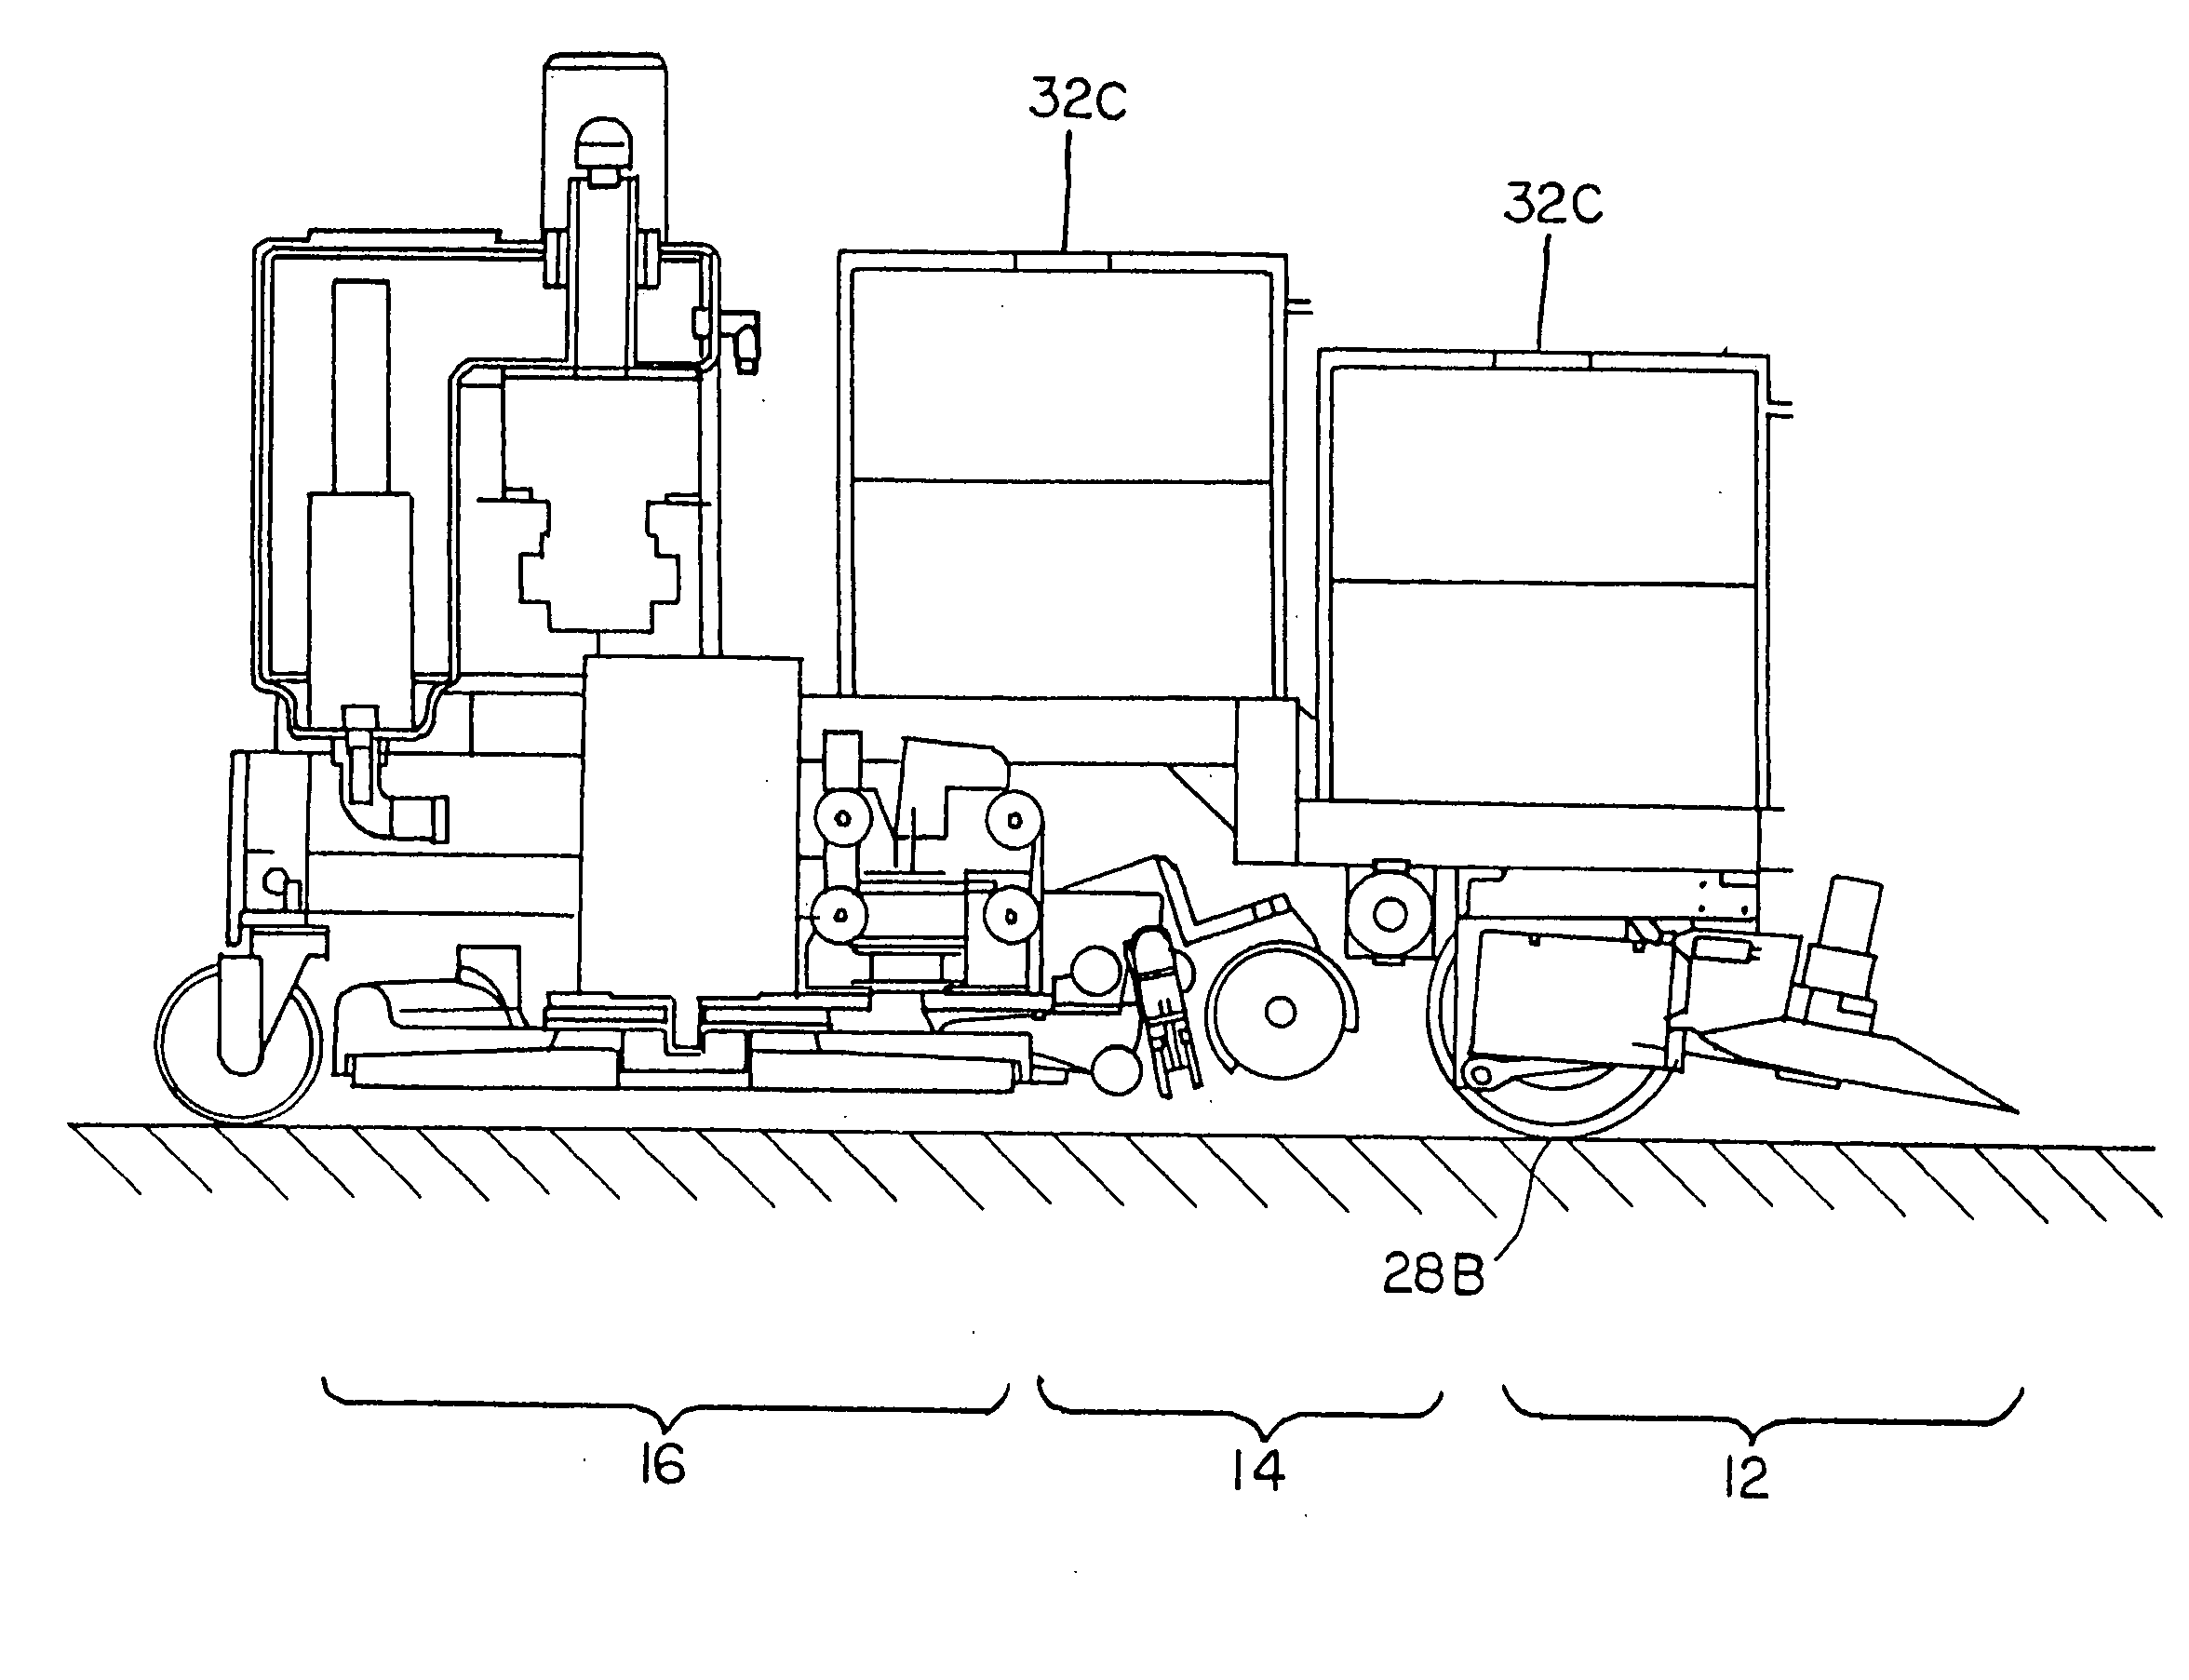 Floor cleaning apparatus with control circuitry